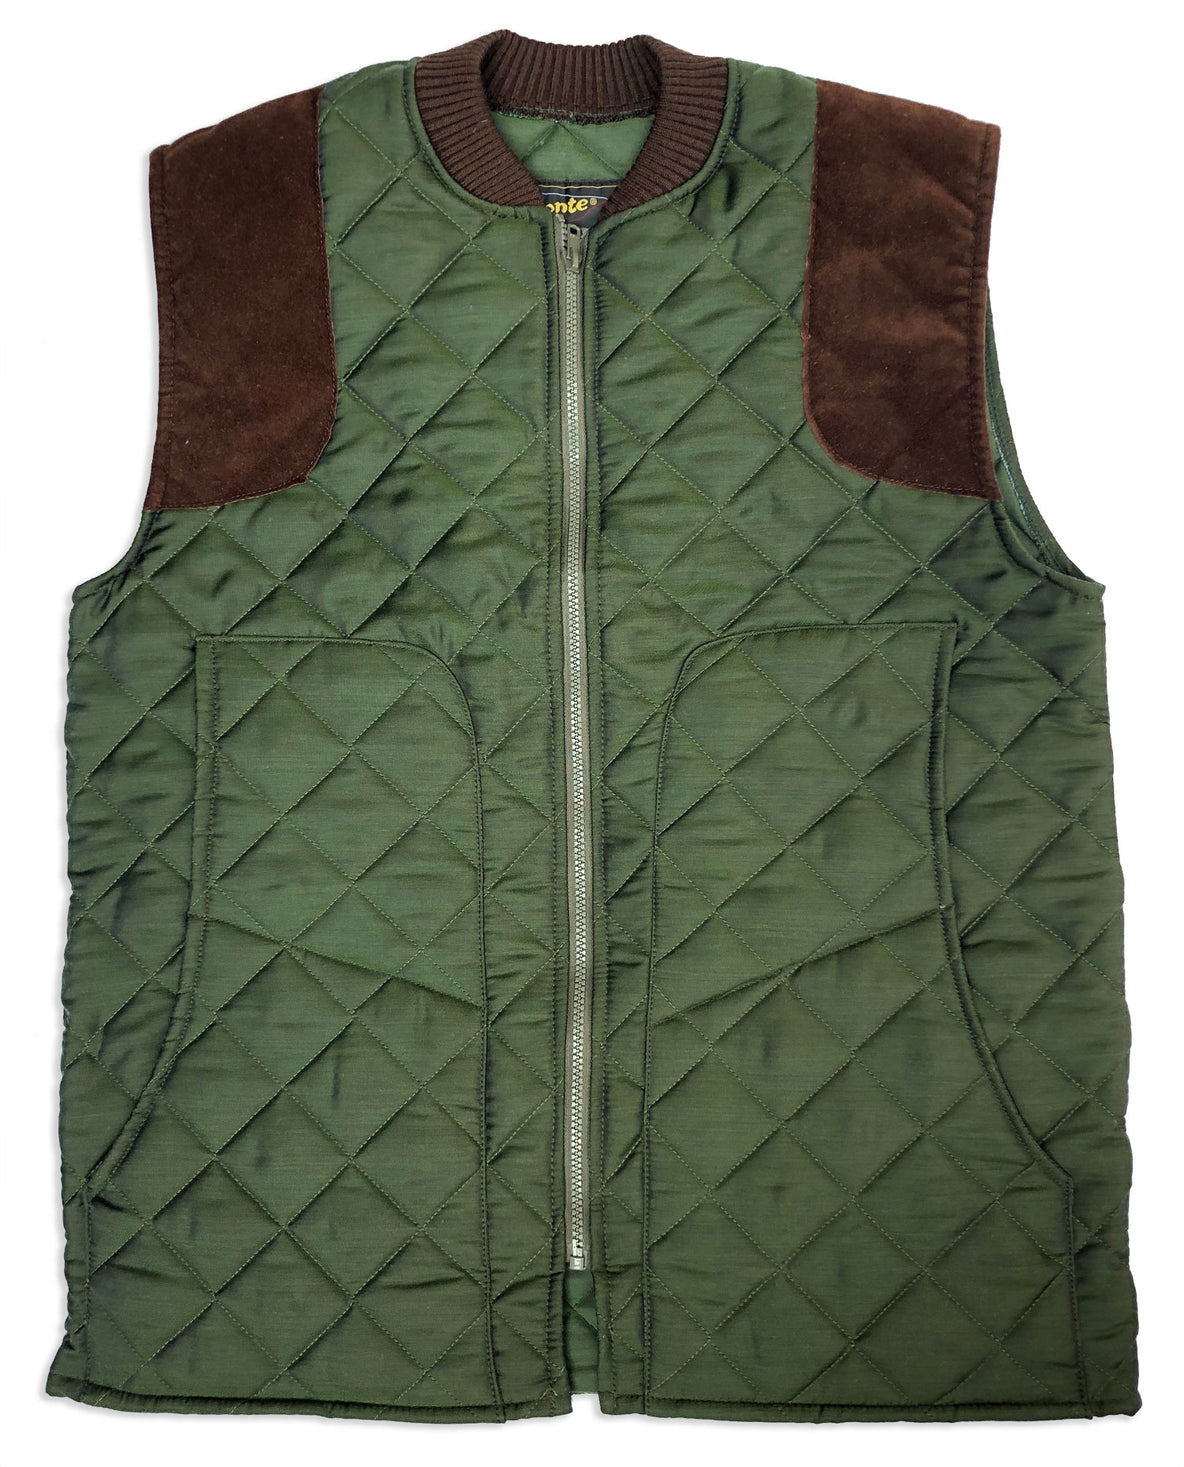 Bronte Quilted Shooting Waistcoat in green with shoulder protectors 